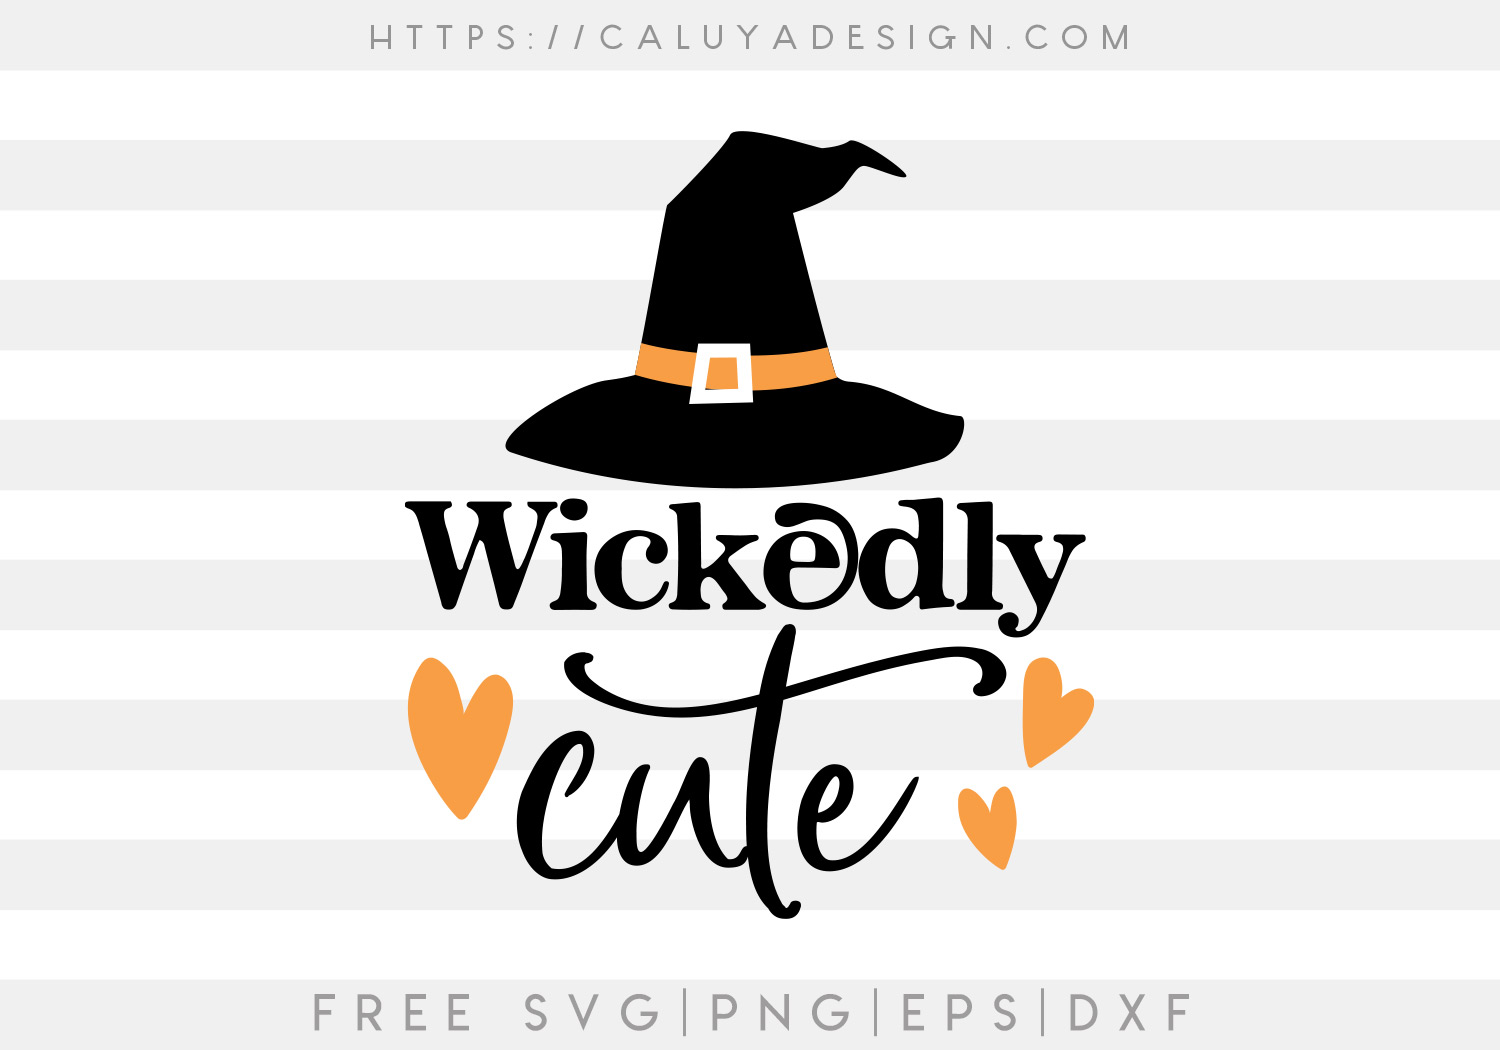 Wickedly Cute SVG, PNG, EPS & DXF